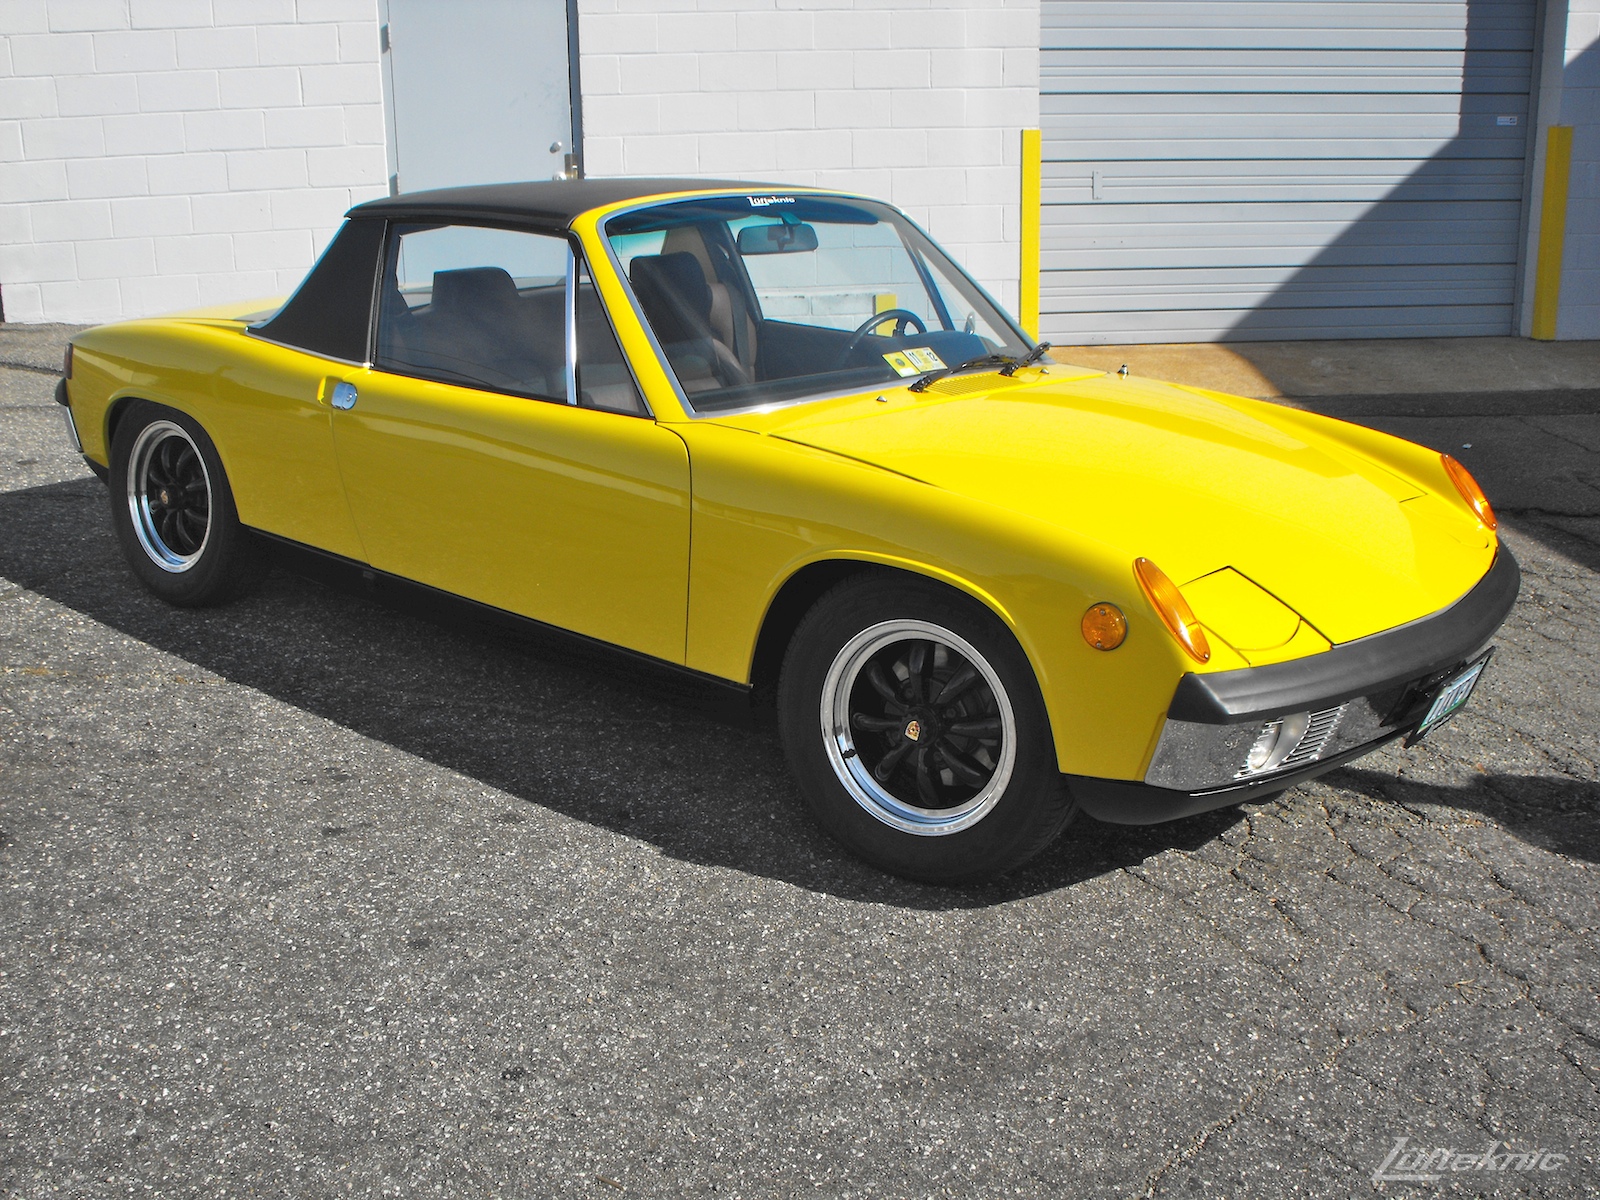 A completely restored yellow Porsche 914 posing in the parking lot of Lufteknic.